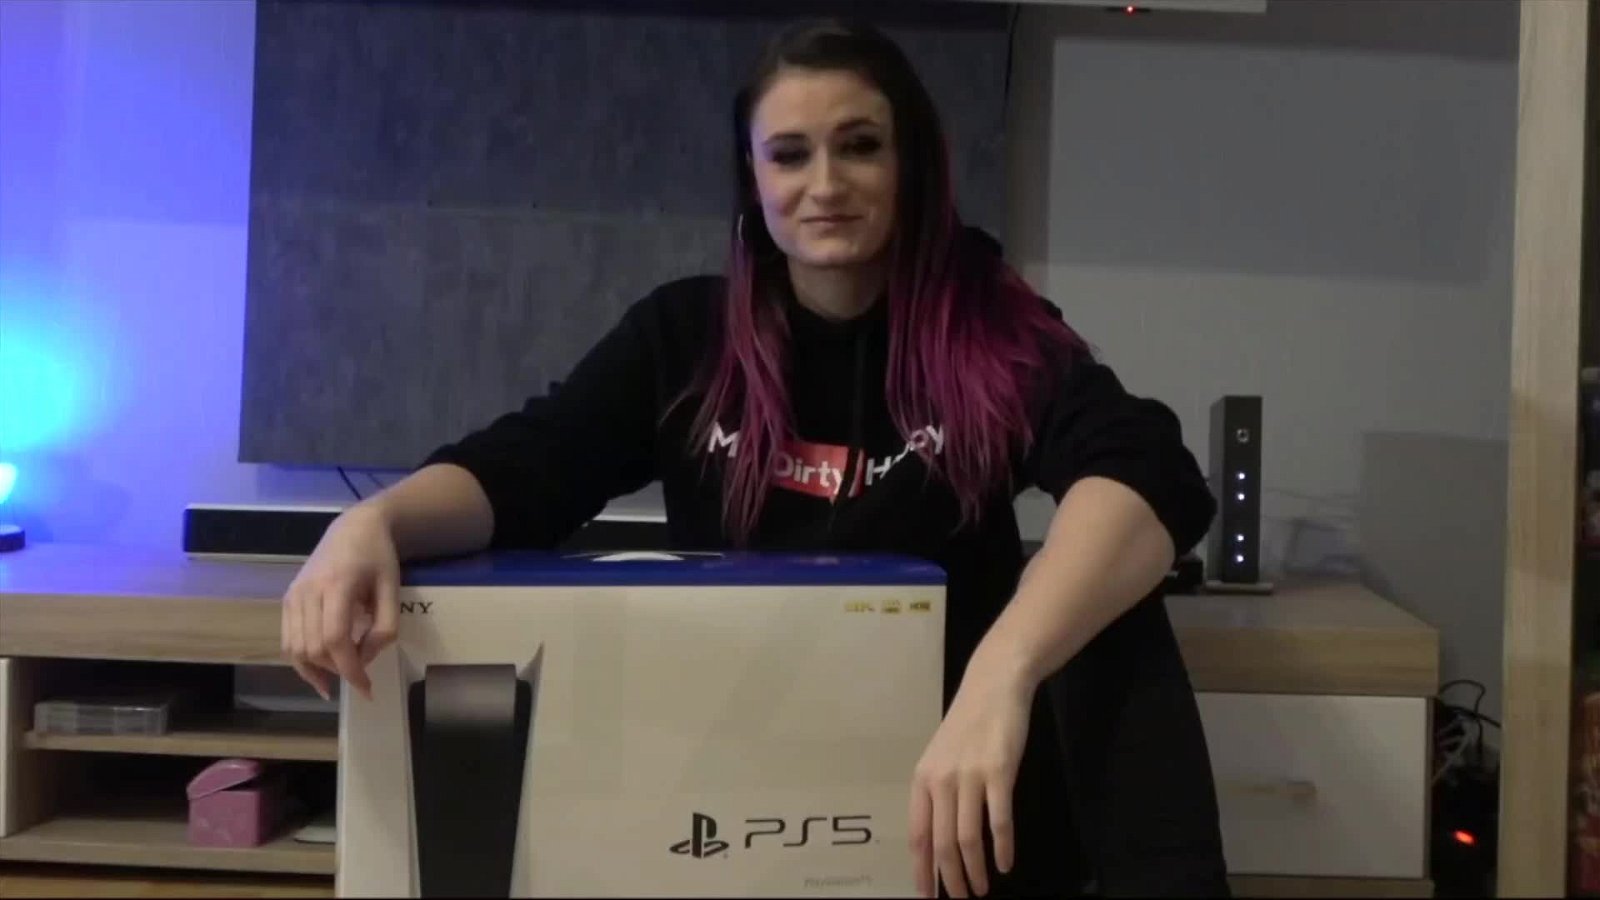 Video by Melina-May with the username @Melina-May, who is a star user,  January 28, 2021 at 9:26 AM and the text says 'GEWINNE MEINE PS5 !!! Win the new #PlayStation5 
Ganz wichtig retweeten!!! Follow me!! RETWEET!!and good luck!!!! 

Click here http://bit.ly/2HuBSVv'